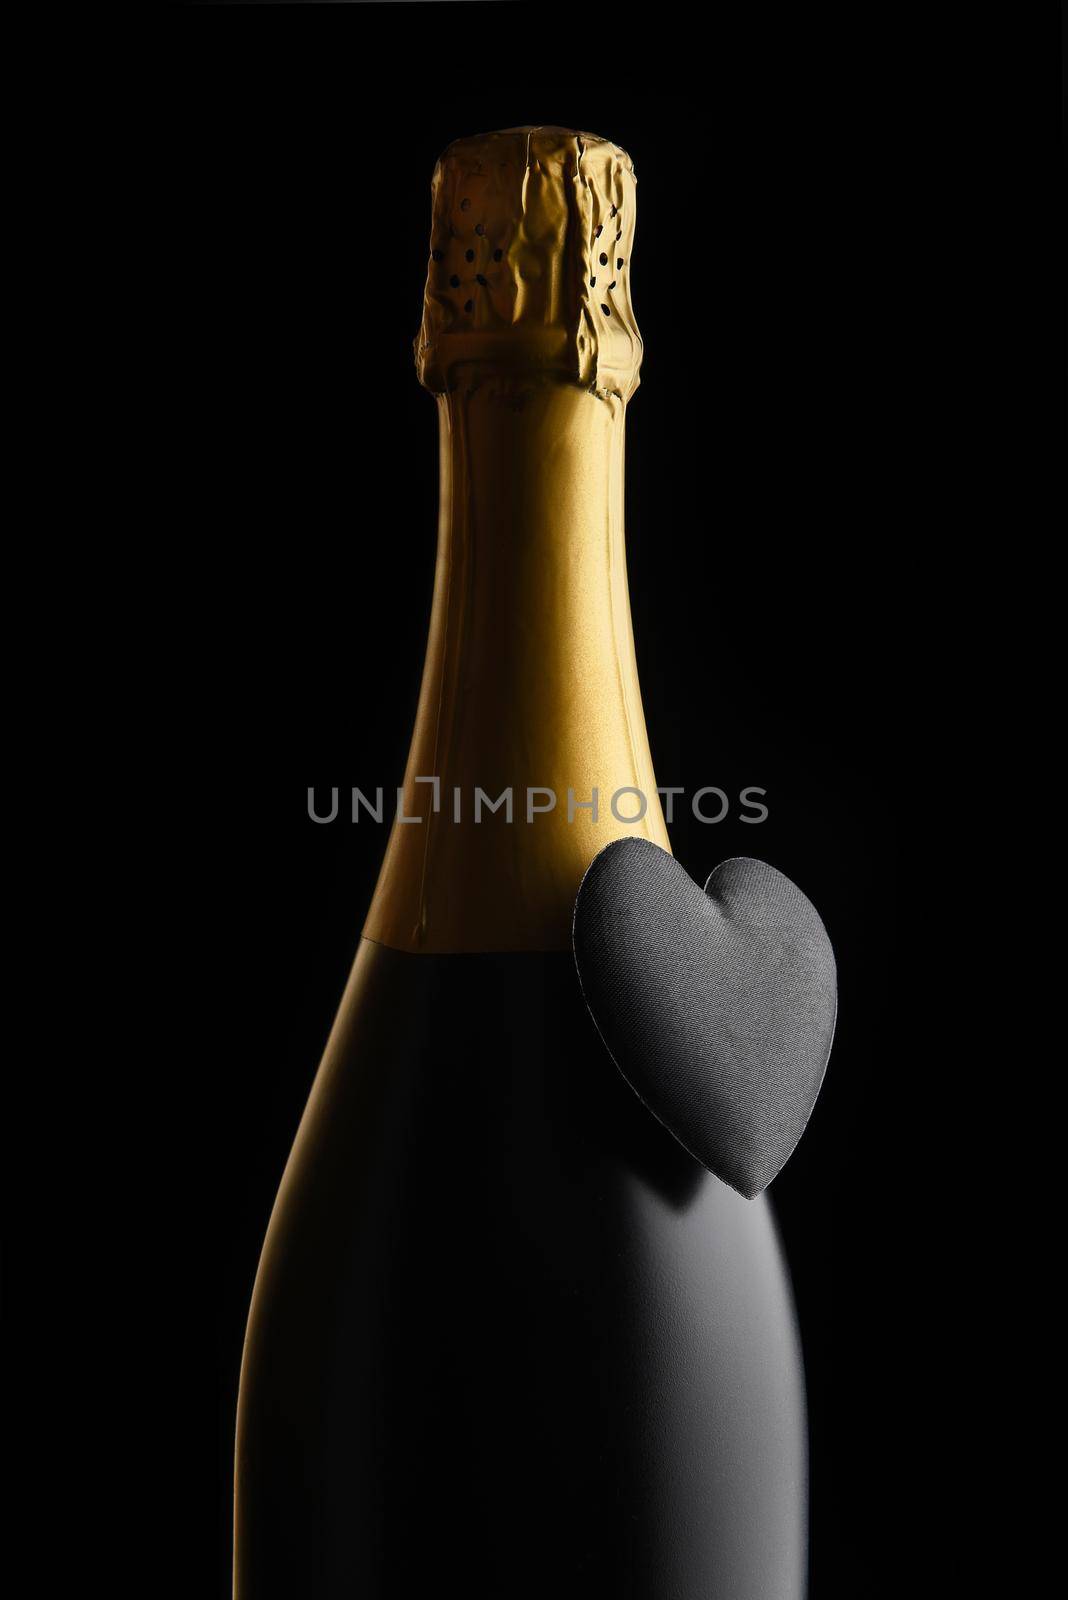 Closeup of a bottle of Champagne with a black heart against a black background by sCukrov